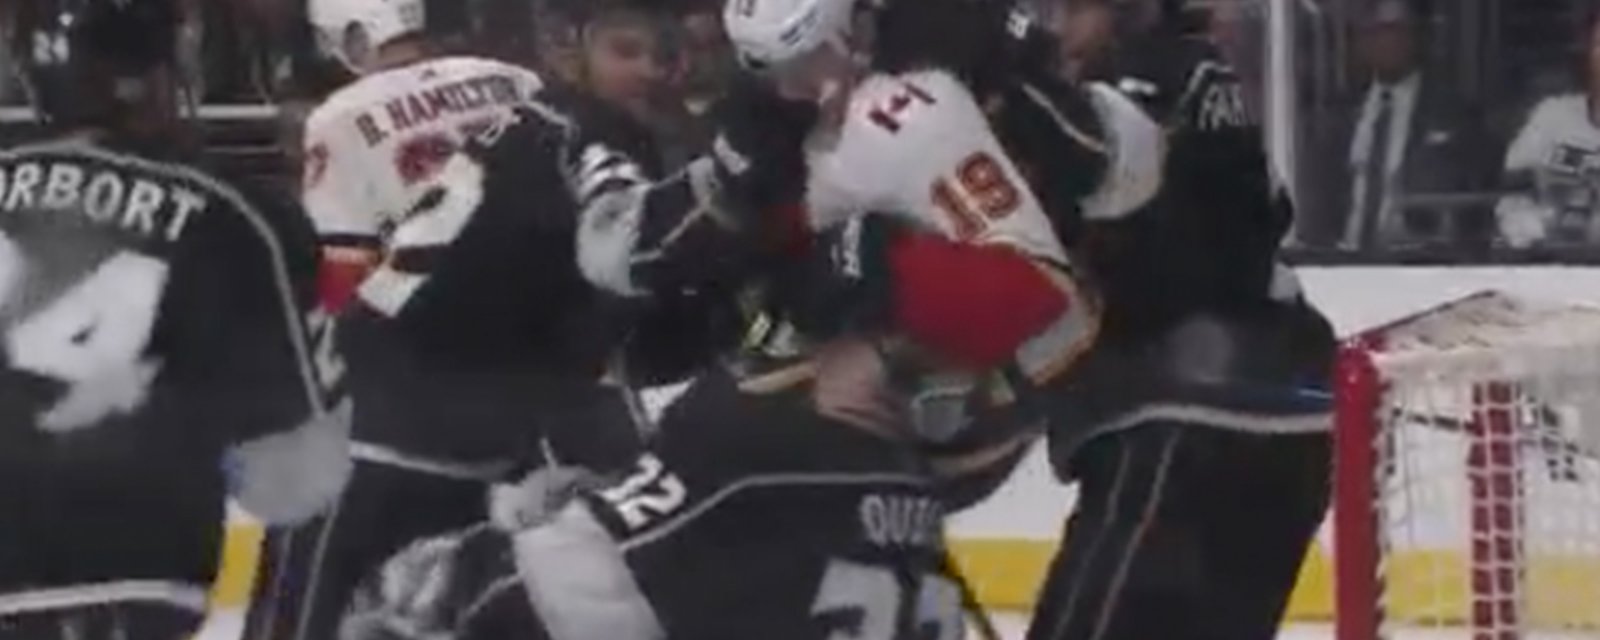 Must See: Quick goes for the takedown, but Tkachuk rips his mask off!